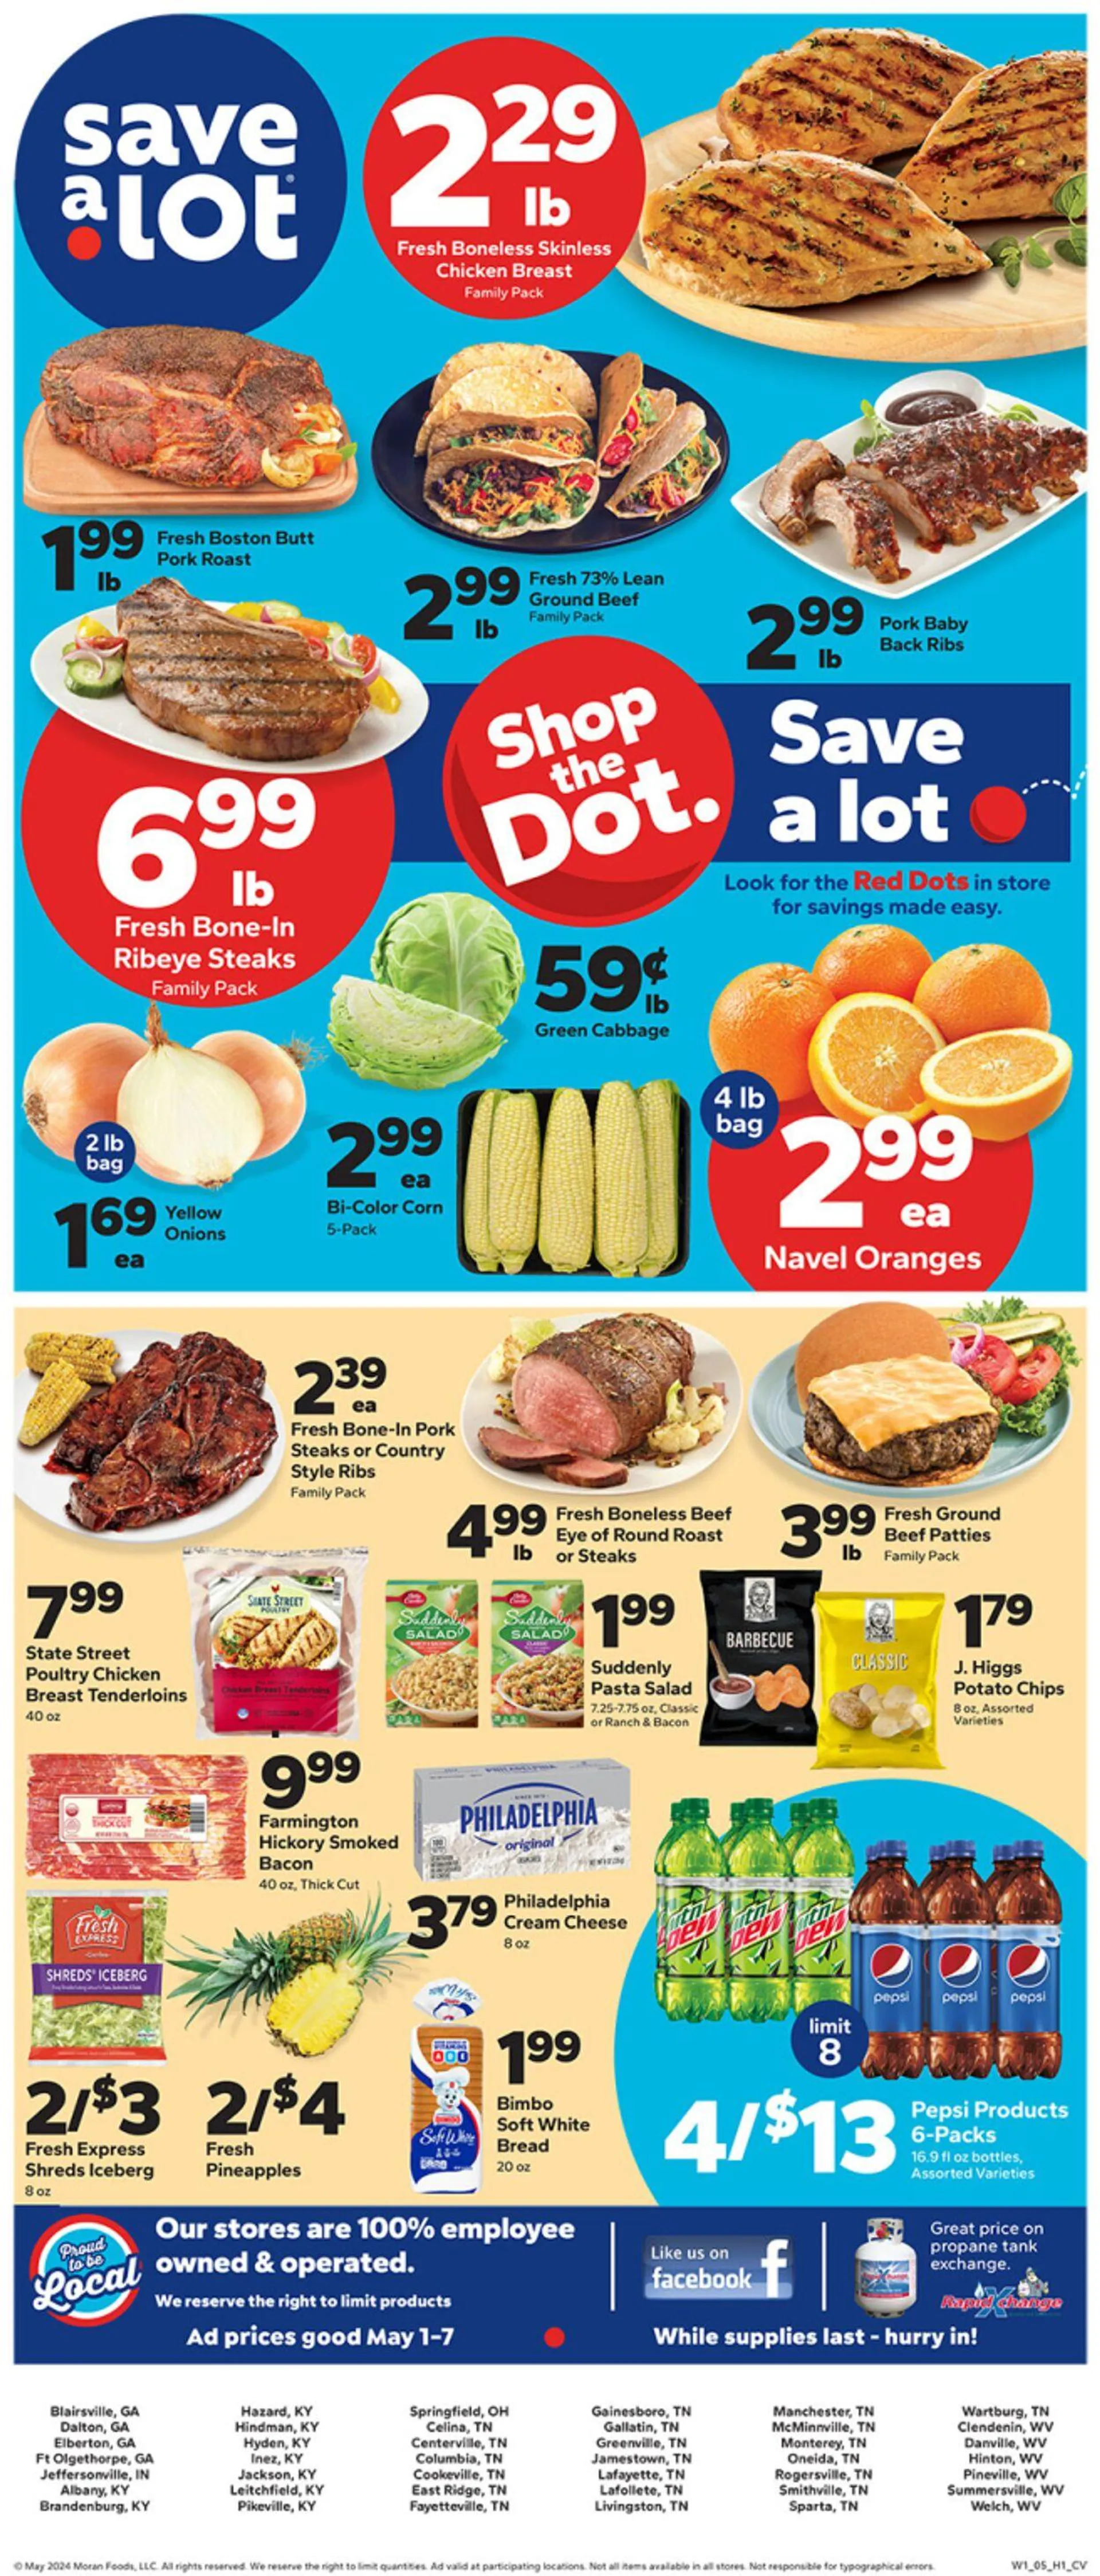 Save a Lot - Dalton Current weekly ad - 1